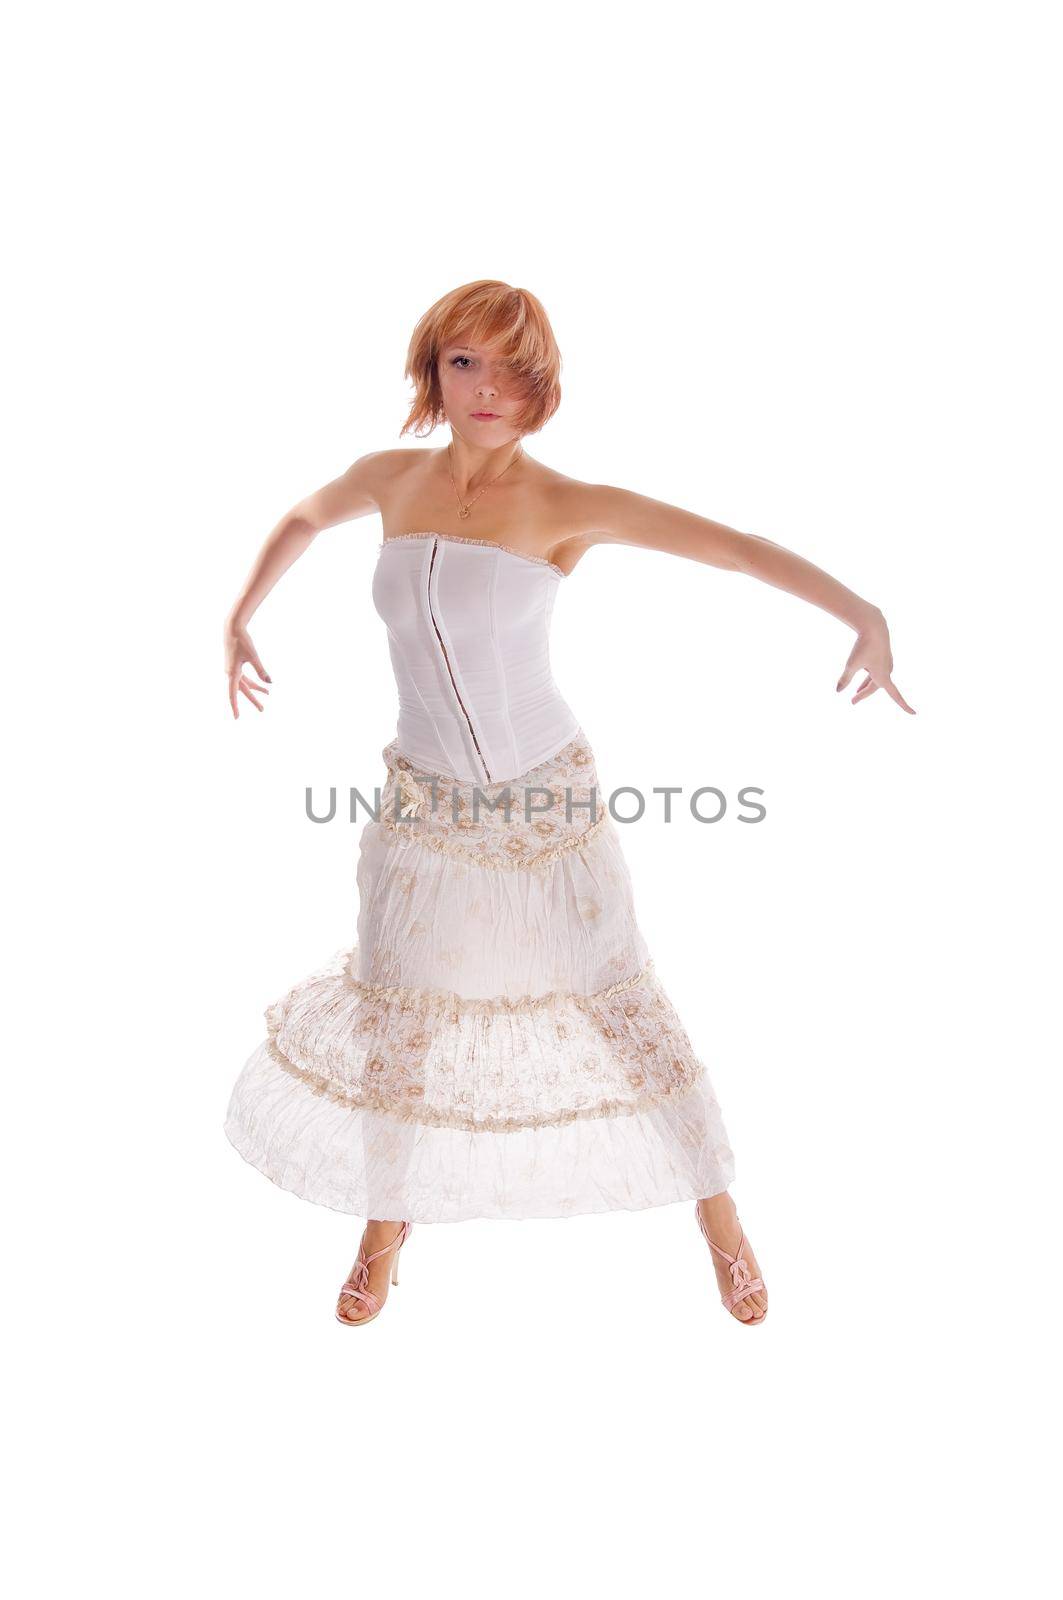 Red haired dancer isolated on white background